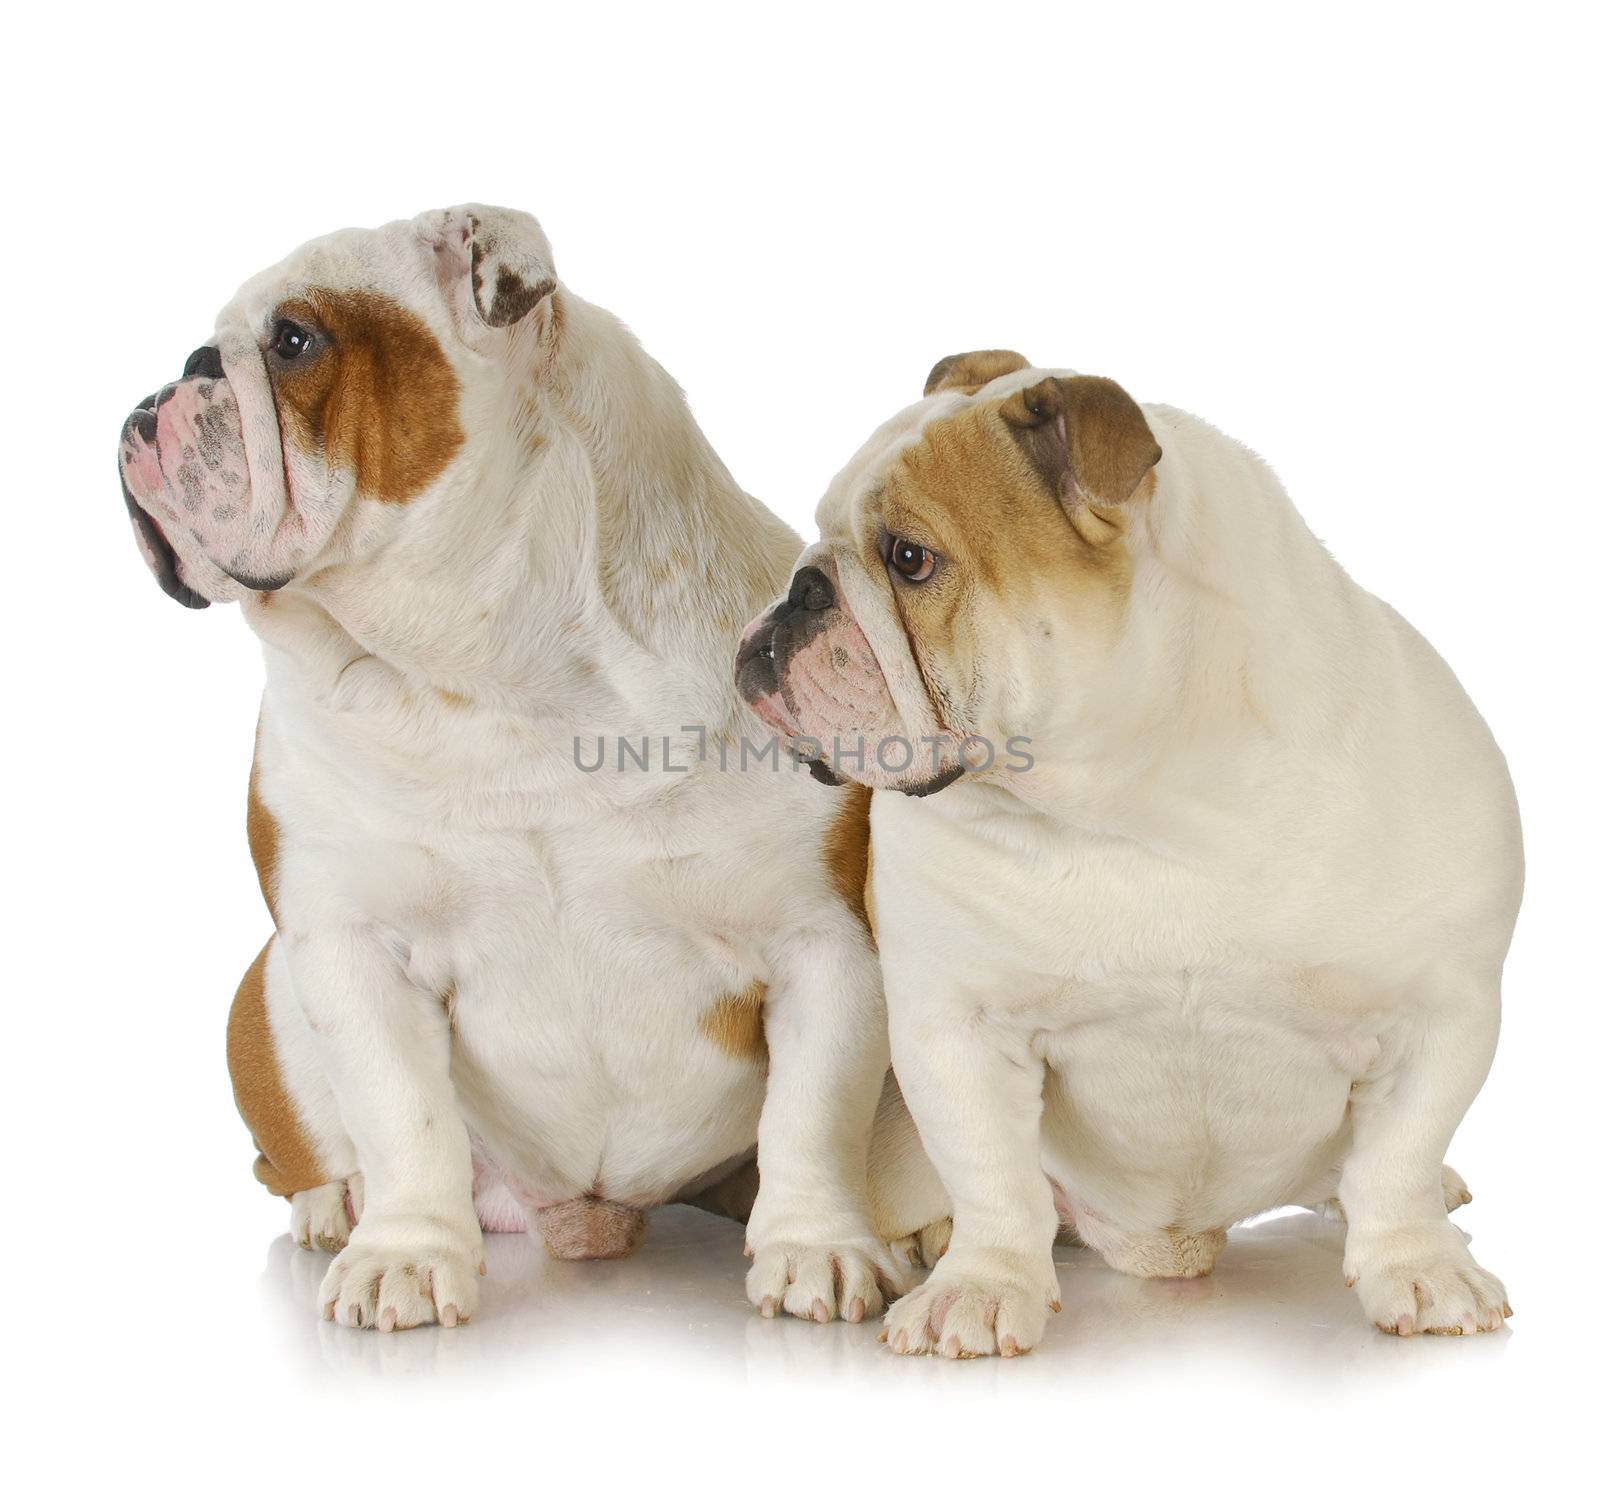 two bulldogs by willeecole123